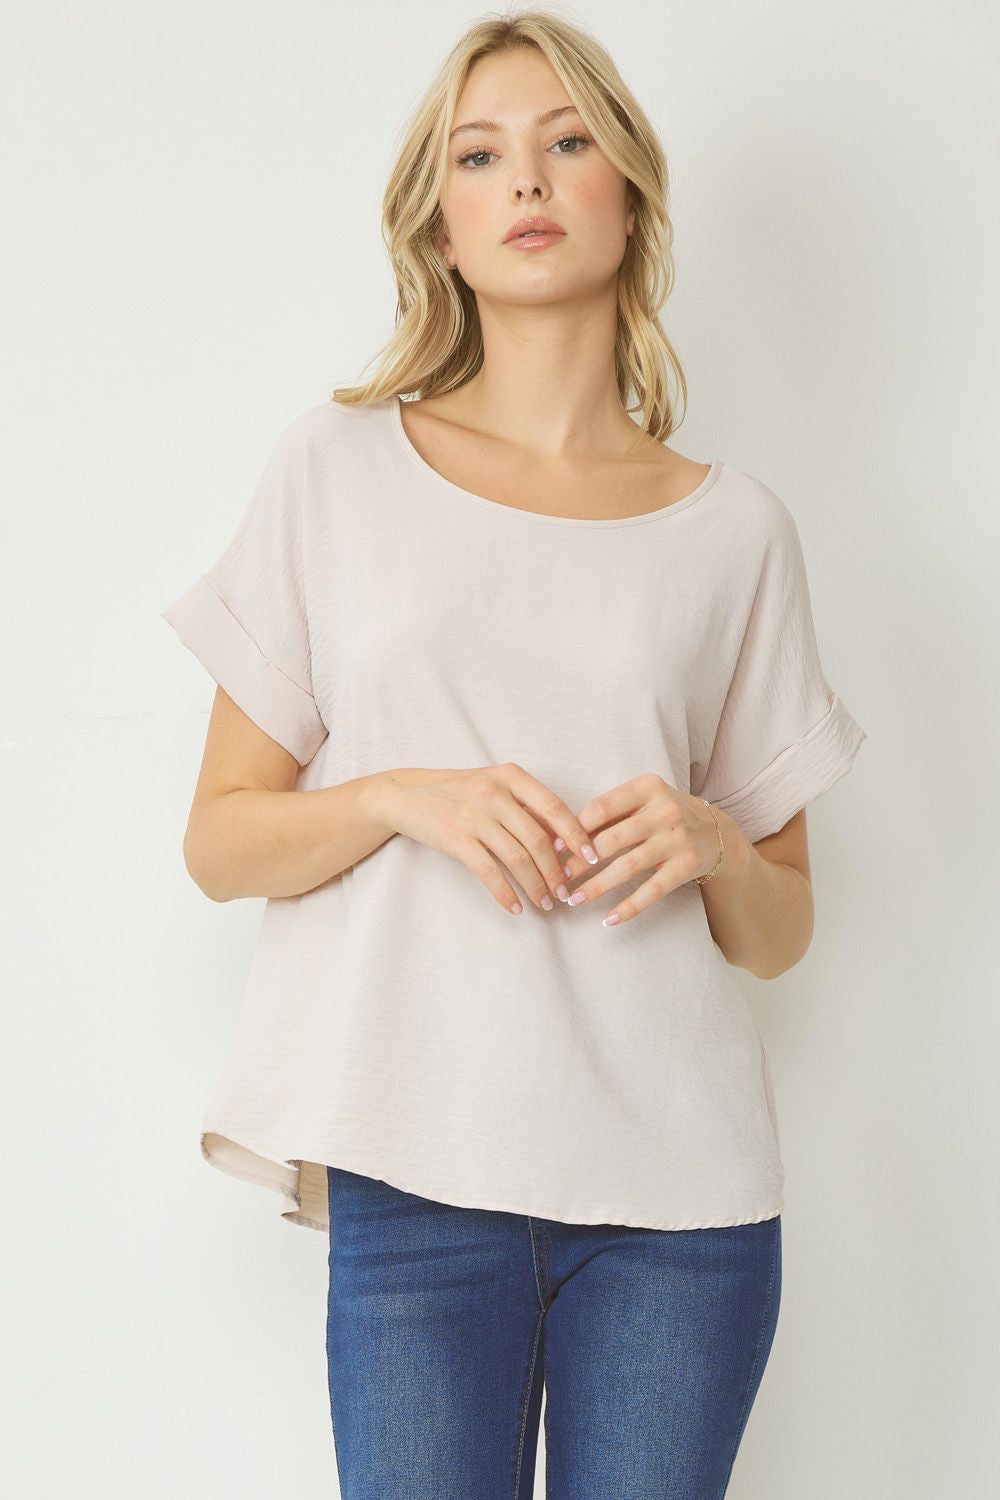 Oatmeal scoop-neck top featuring permanent rolled sleeve detail and an asymmetrical hem.